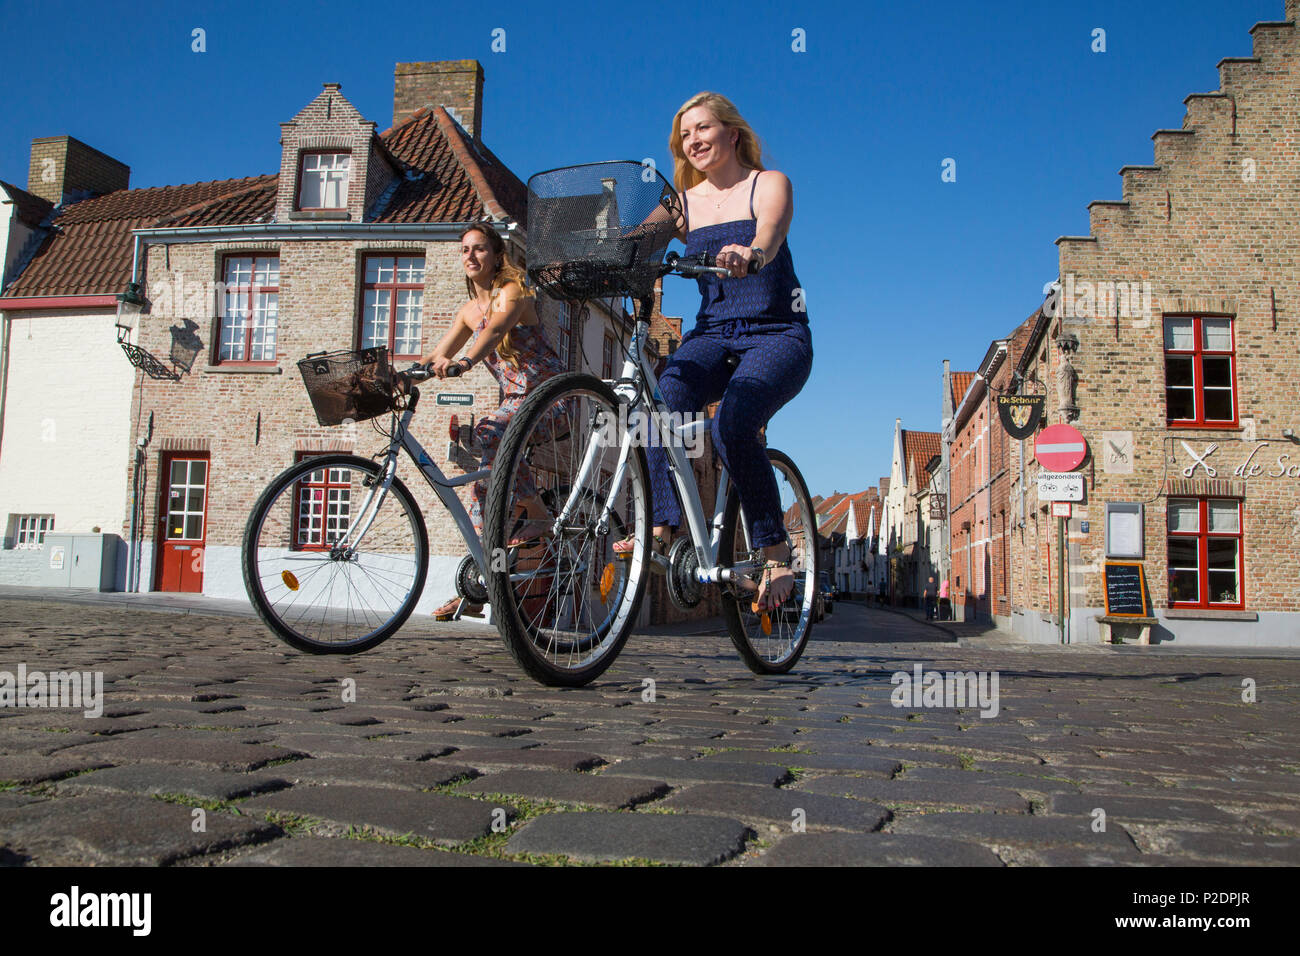 Two young women on bicycles on a cobblestone street near Coupure Marina, Bruges Brugge, Flemish Region, Belgium Stock Photo